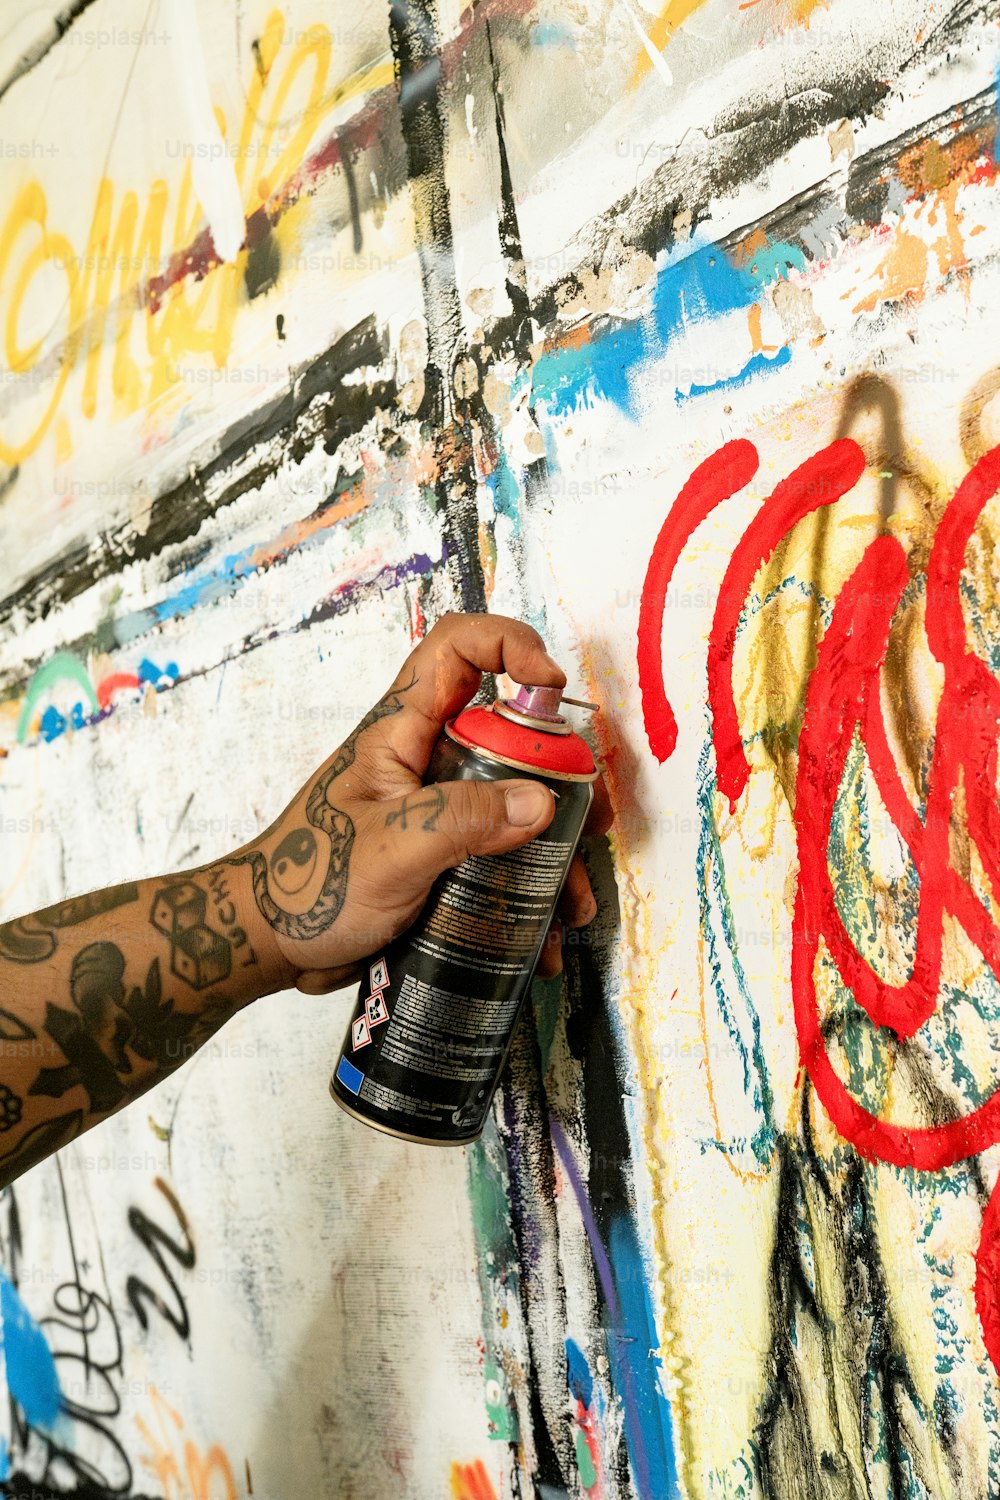 a person spray painting on a wall with graffiti